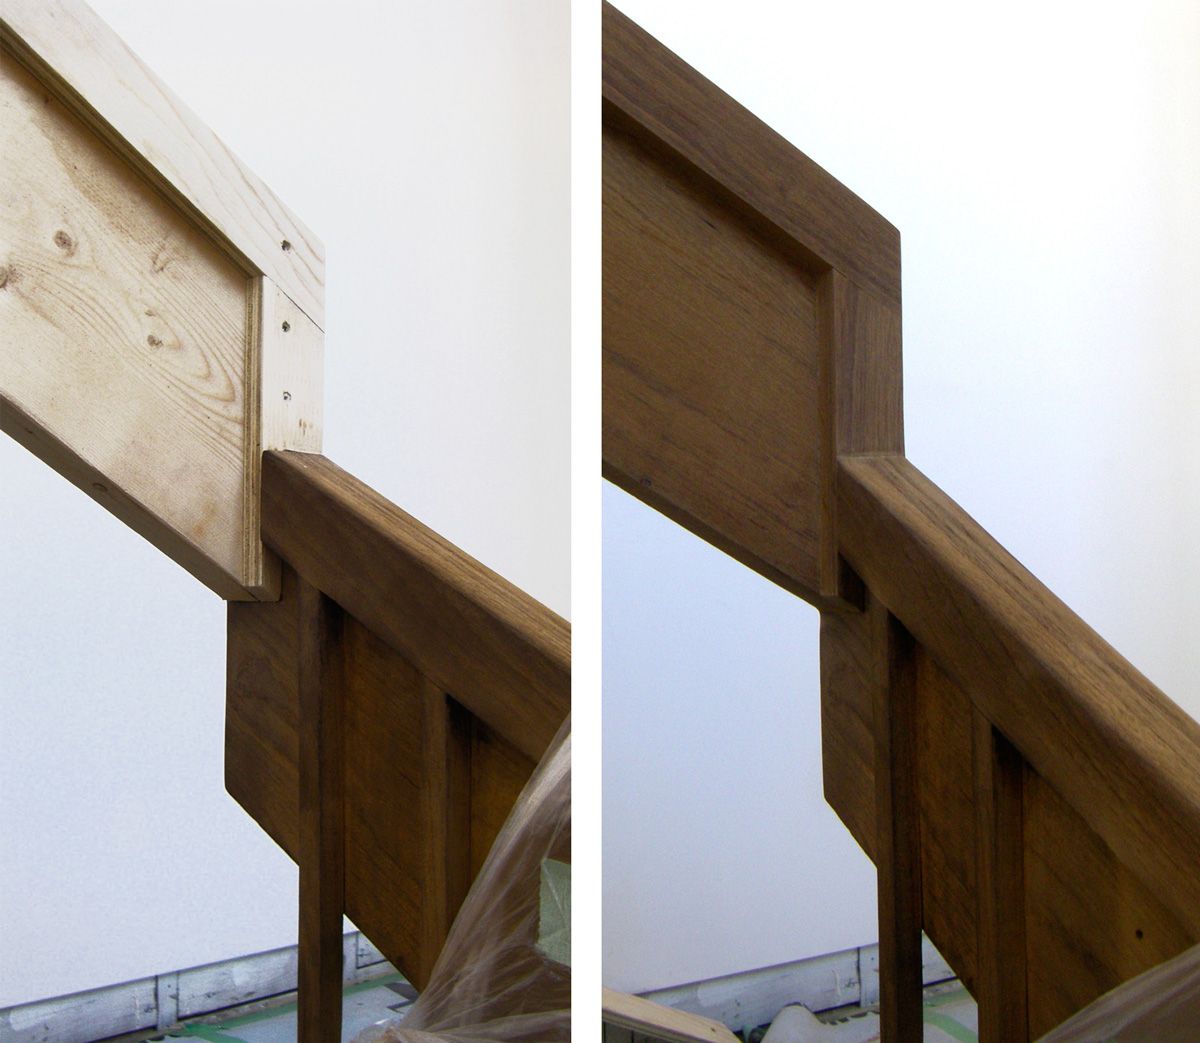 Unit 7 Architecture | Projects - Victoria Beach Summer Home V - BEFORE & AFTER RAILING DETAIL